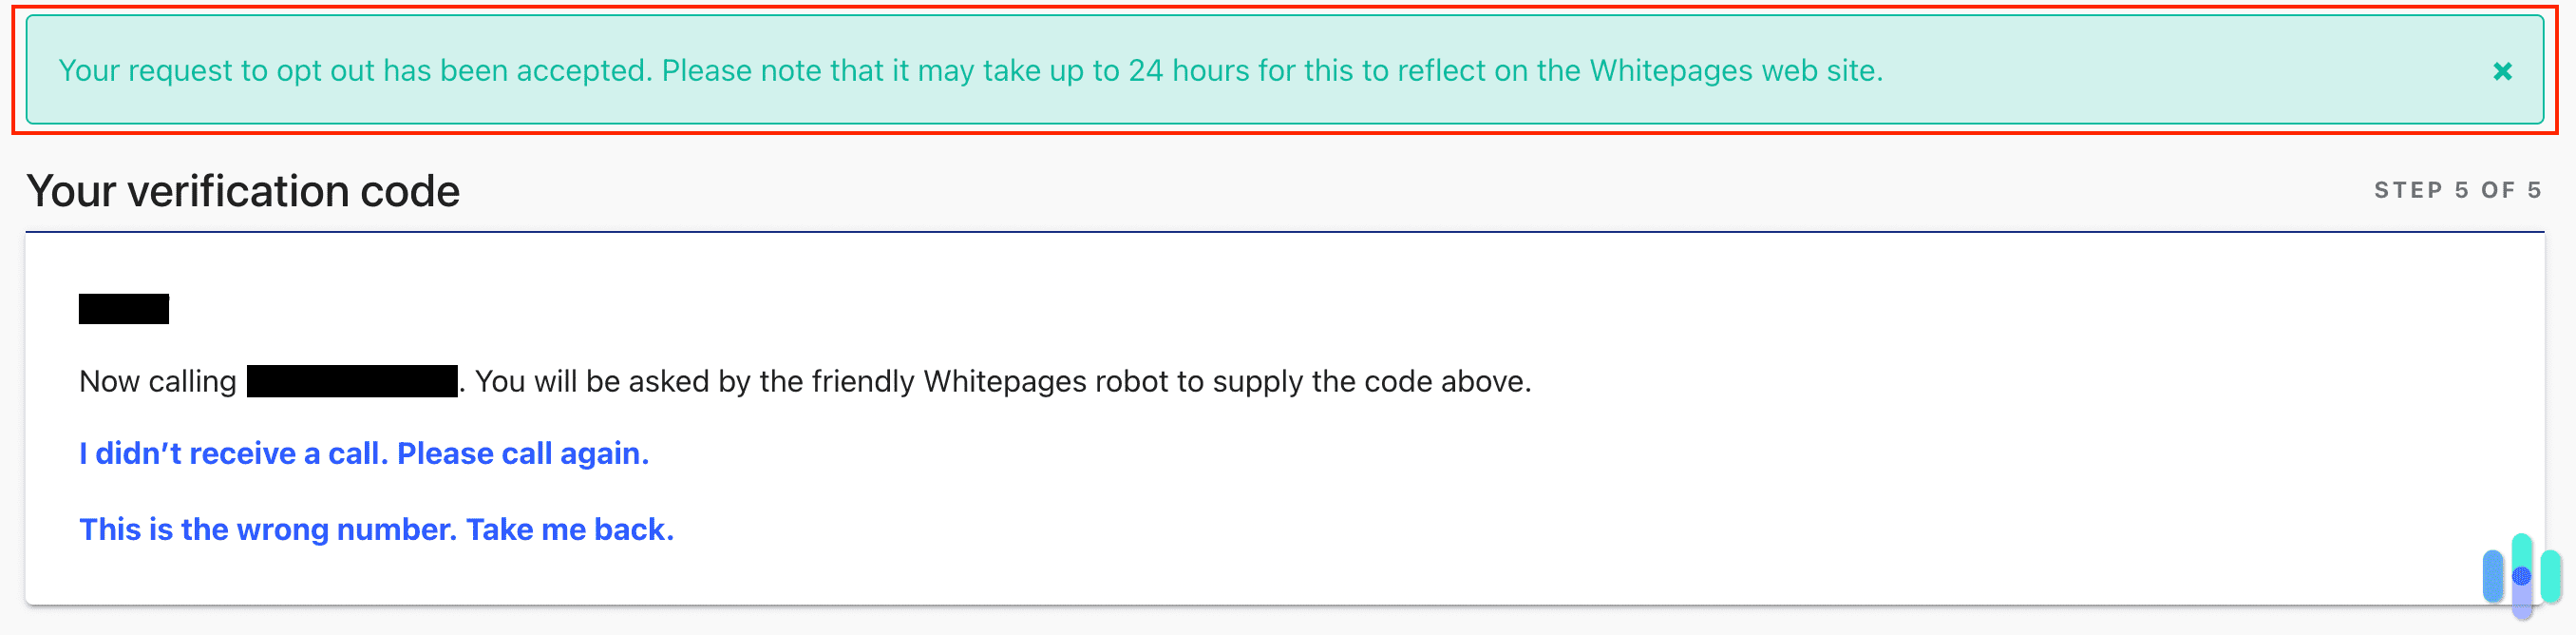 Whitepages opt out confirmation